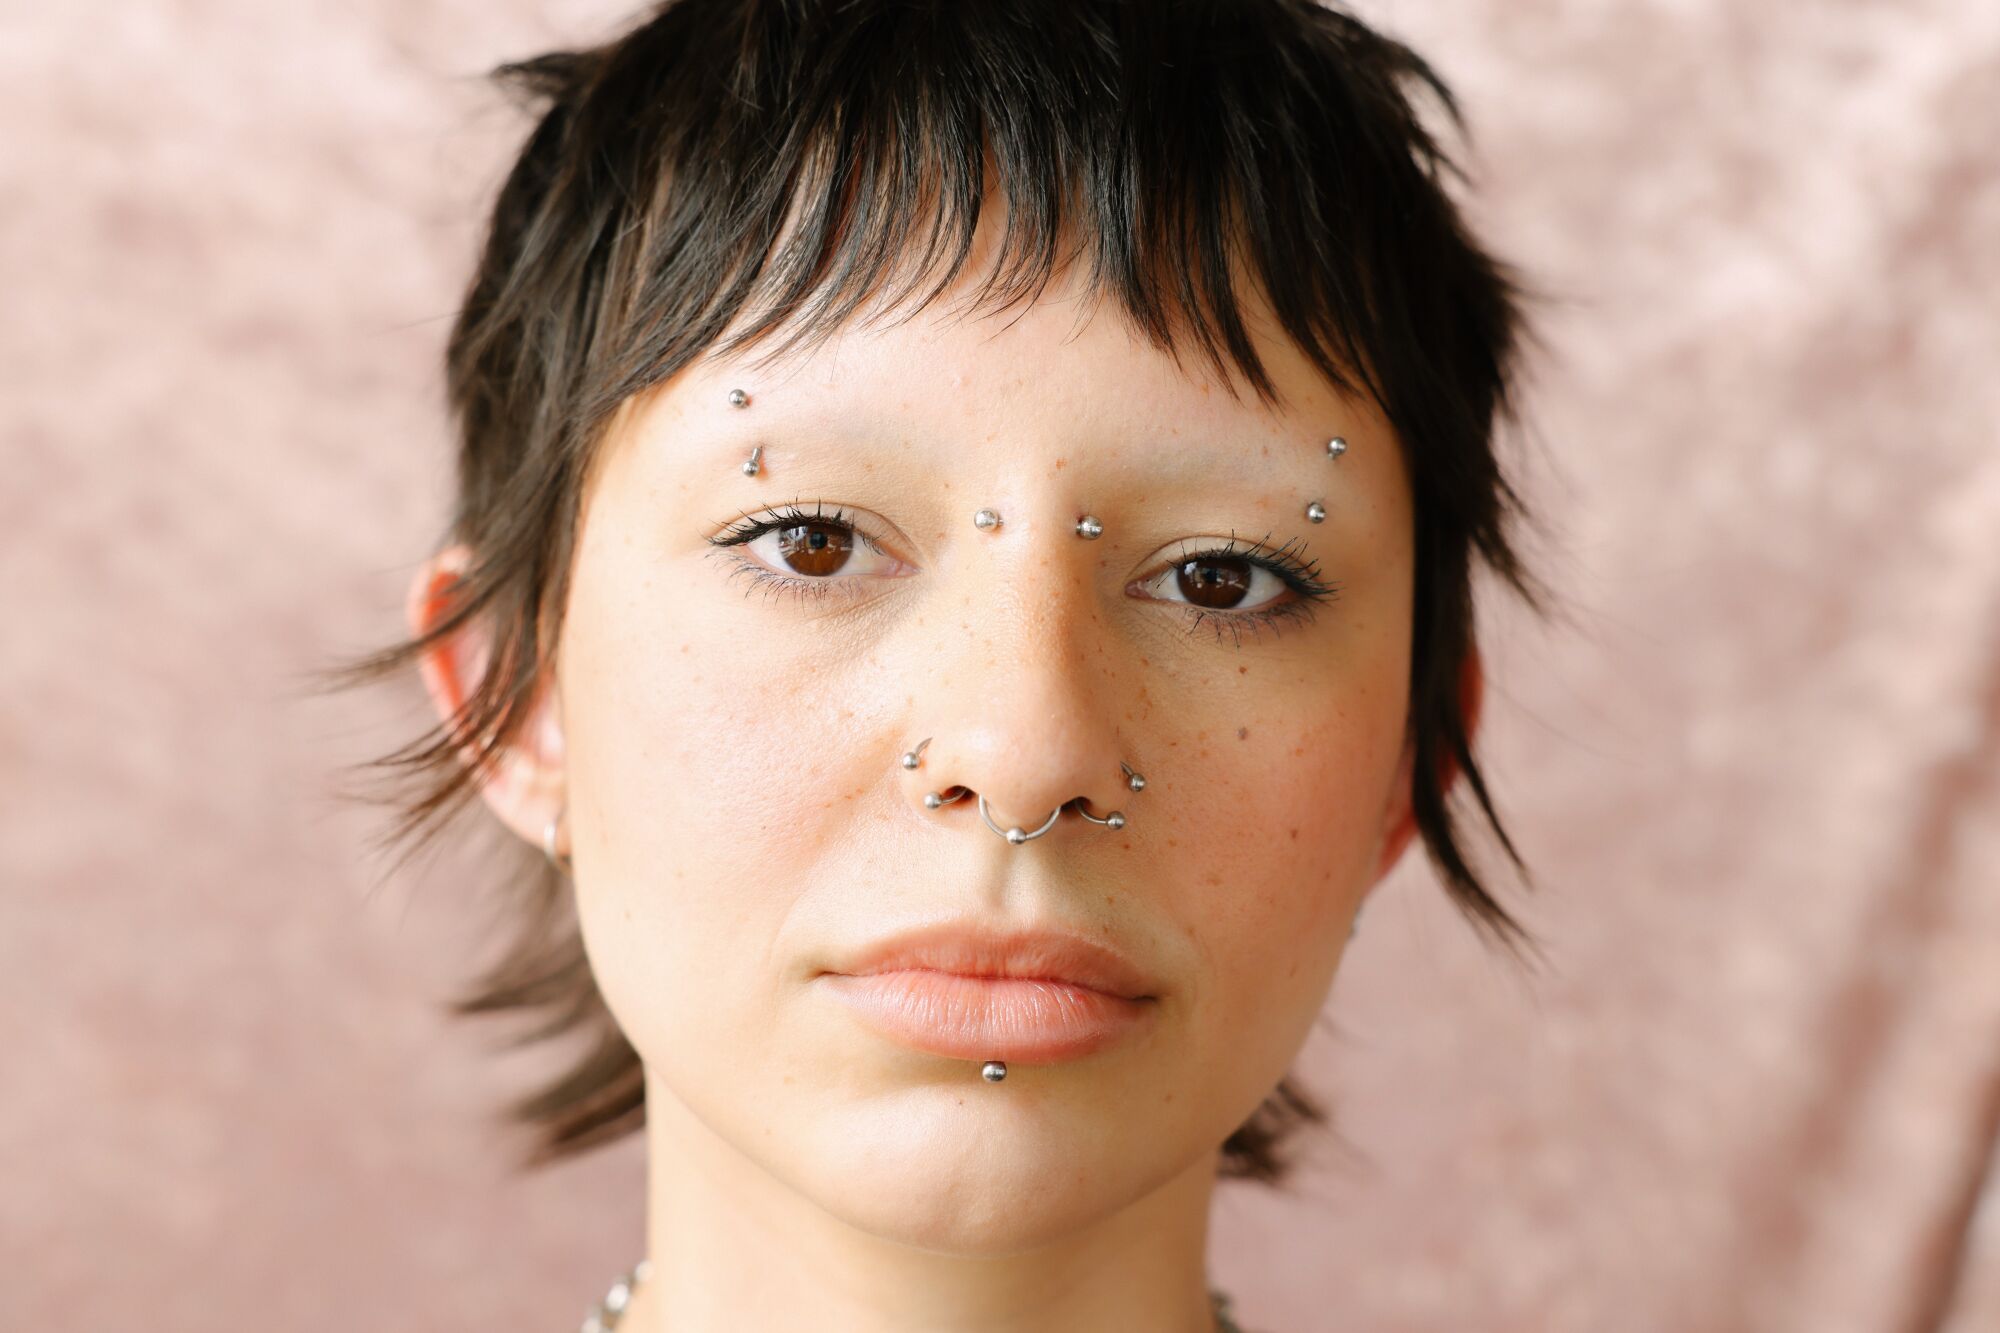 A person with facial piercings short hair feathered around the face looks into the lens.